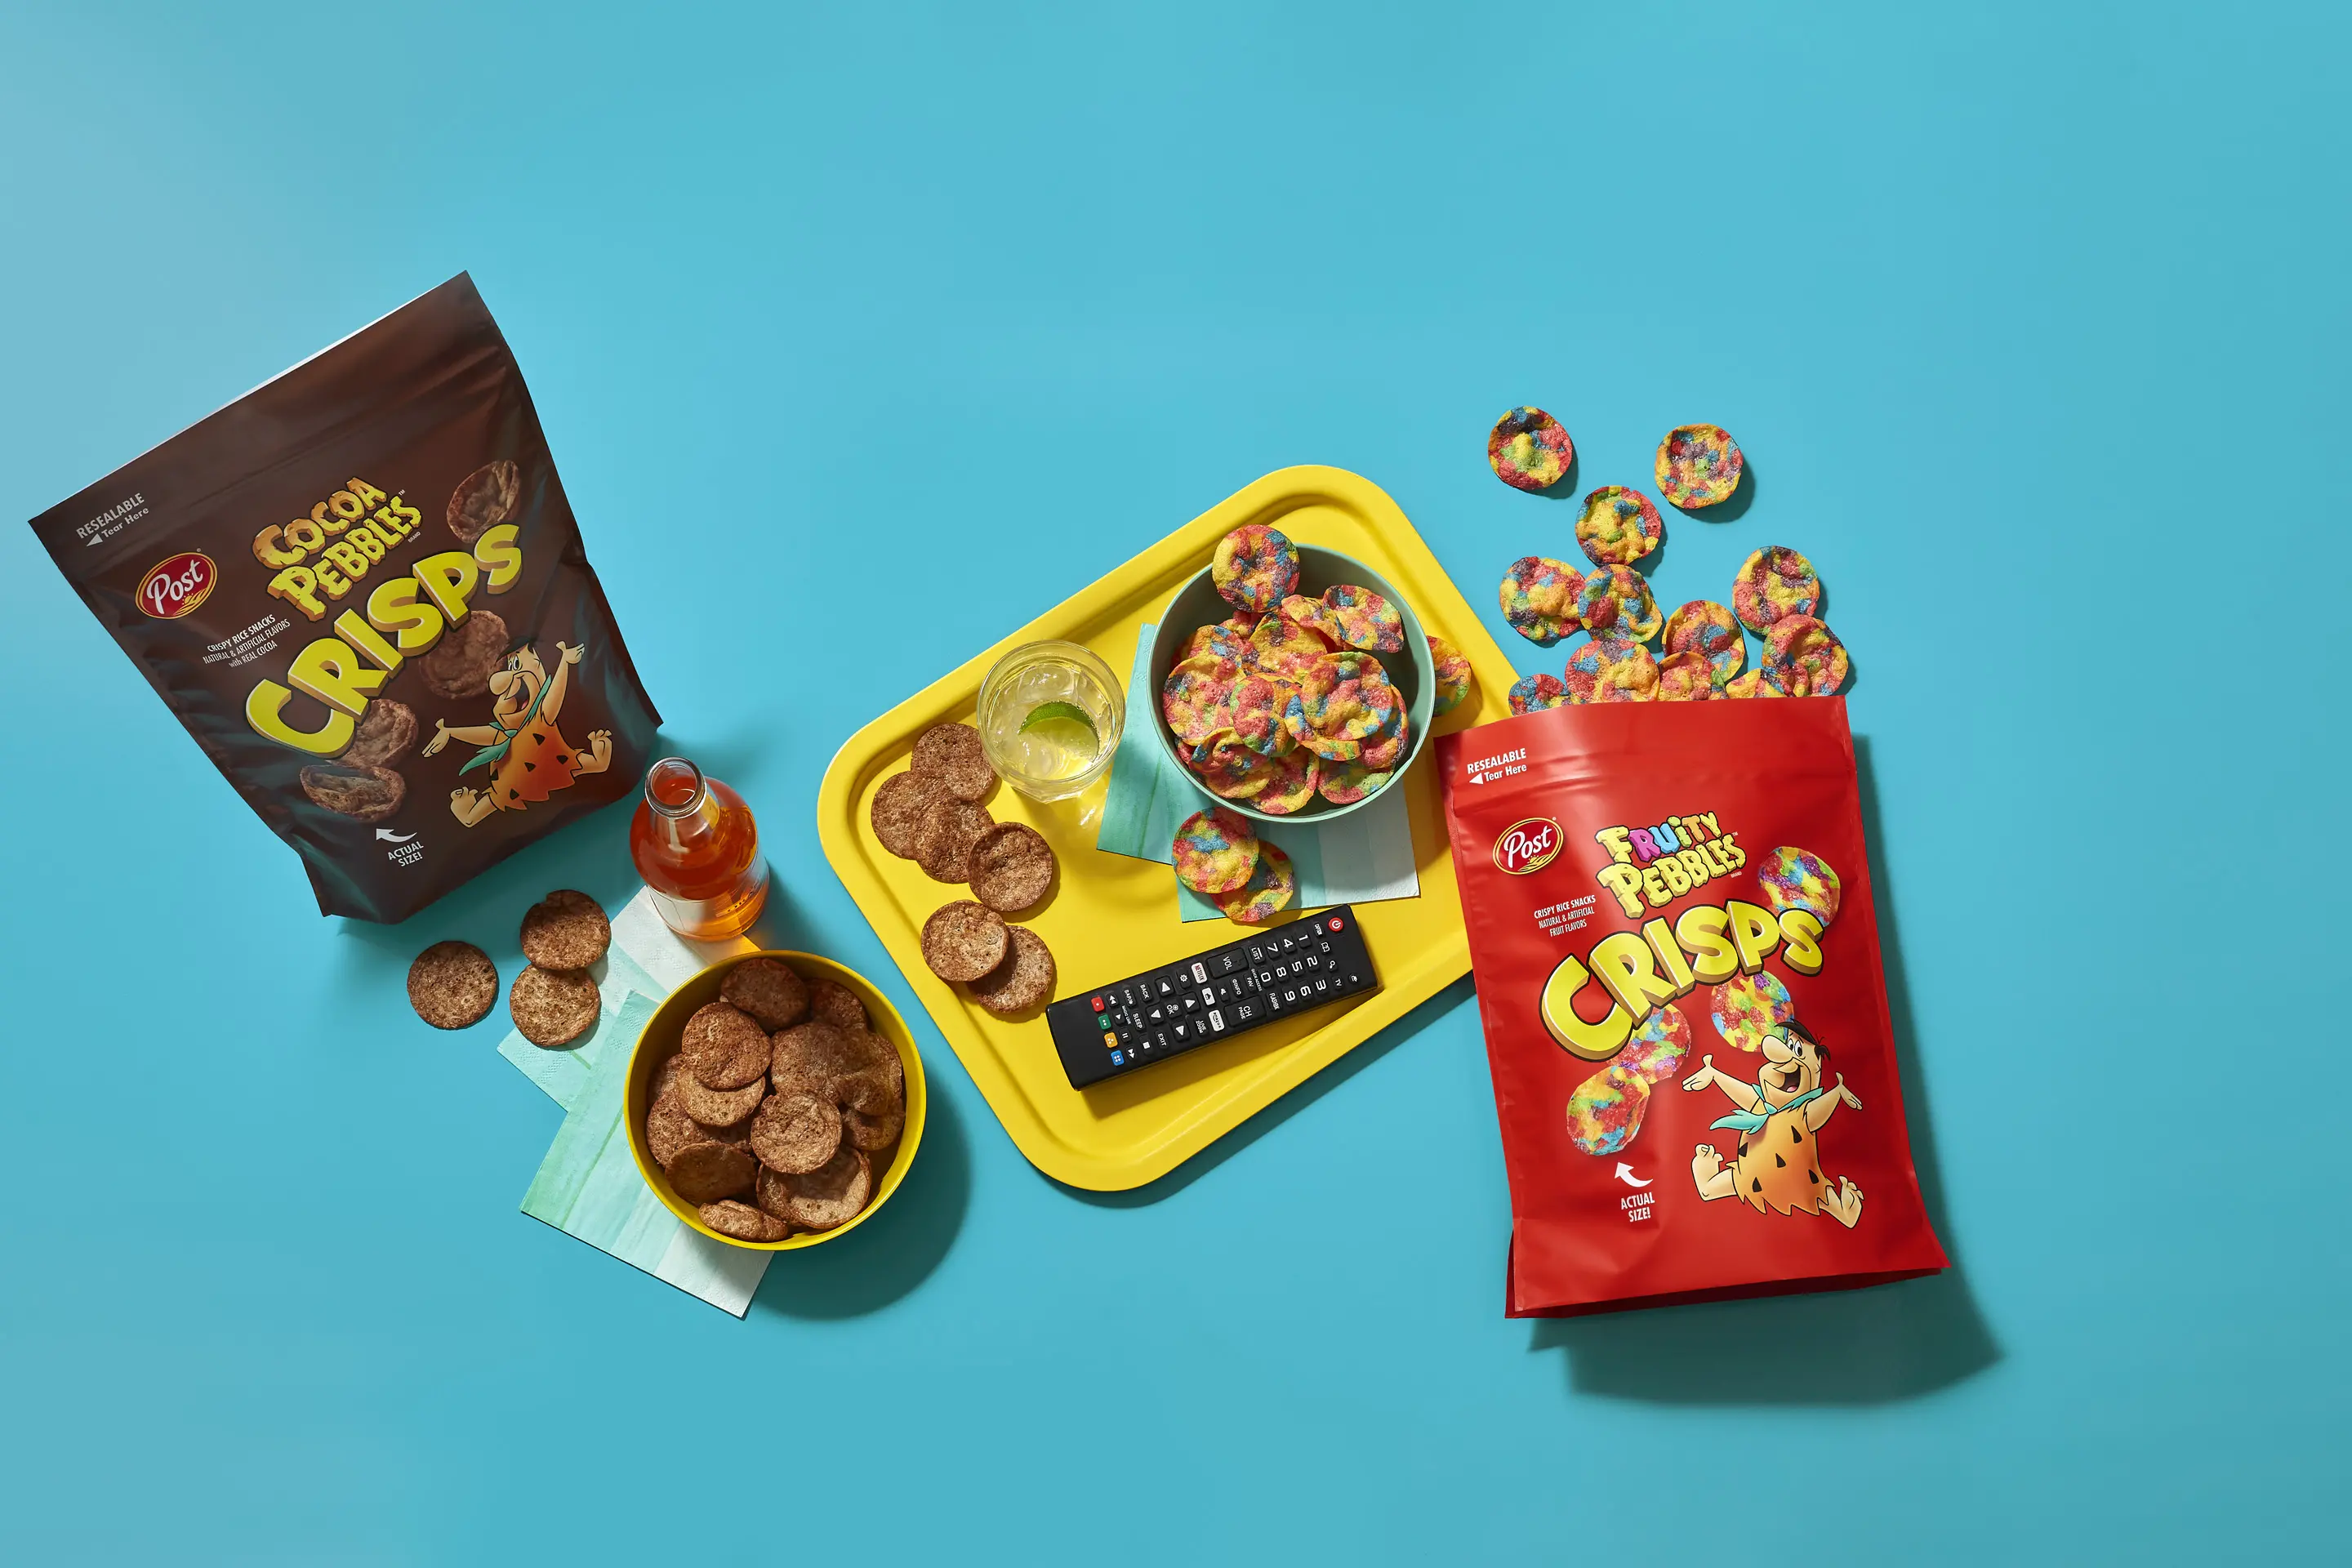 PEBBLES Crisps sustainable on the go packaging